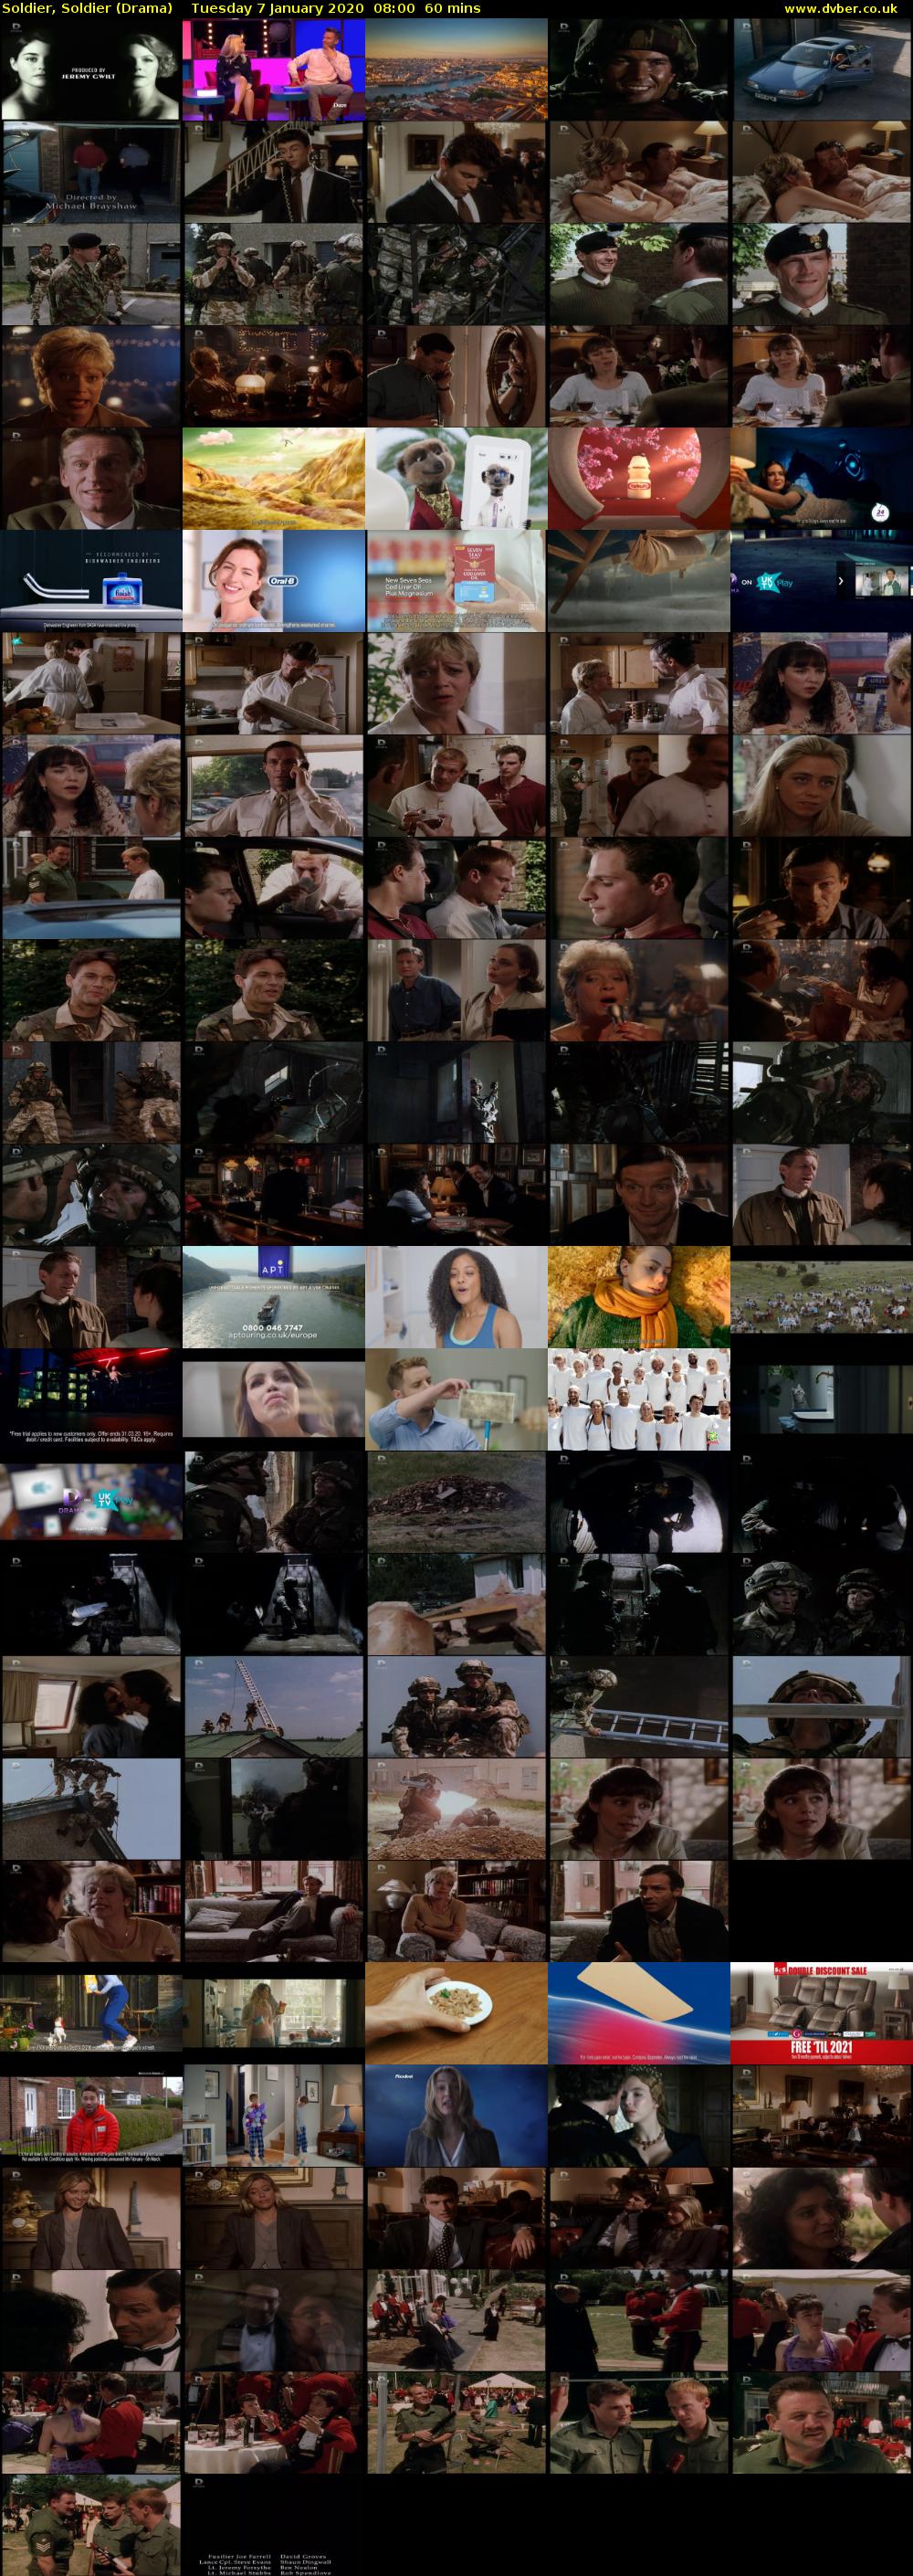 Soldier, Soldier (Drama) Tuesday 7 January 2020 08:00 - 09:00